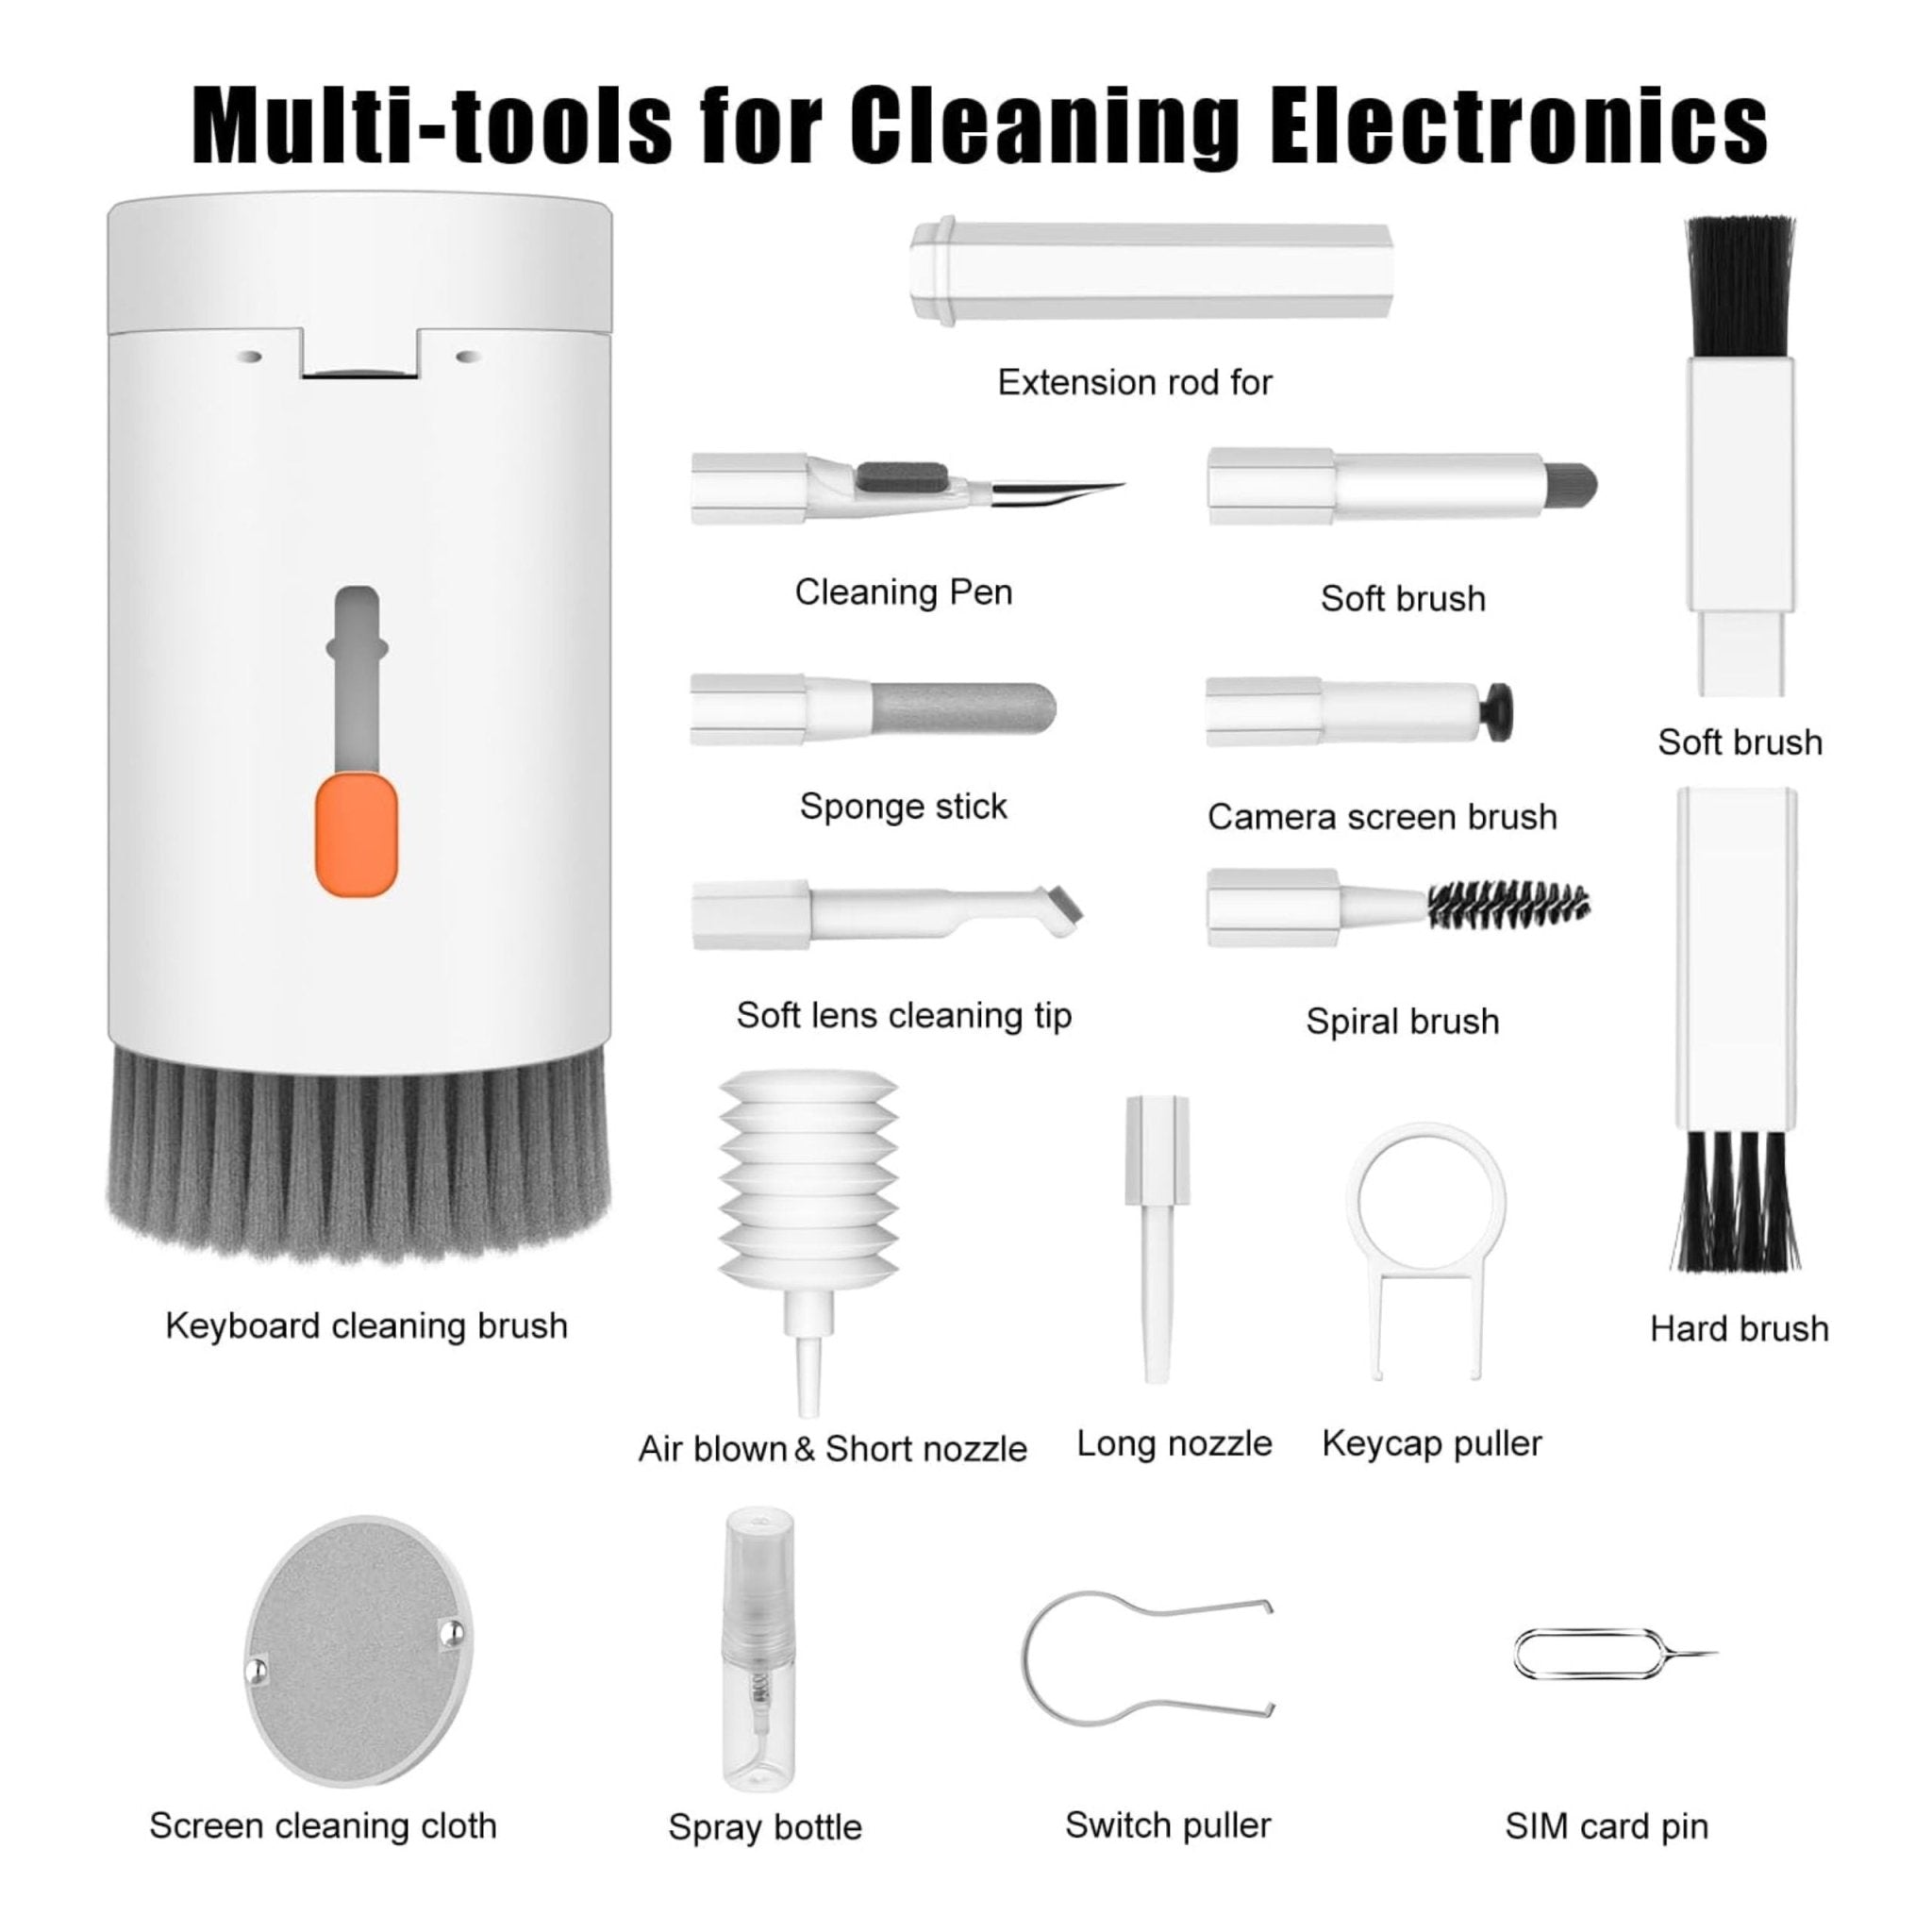 Multifunctional Cleaning Brush 20-in-1 Keyboard Cleaning Kit - White